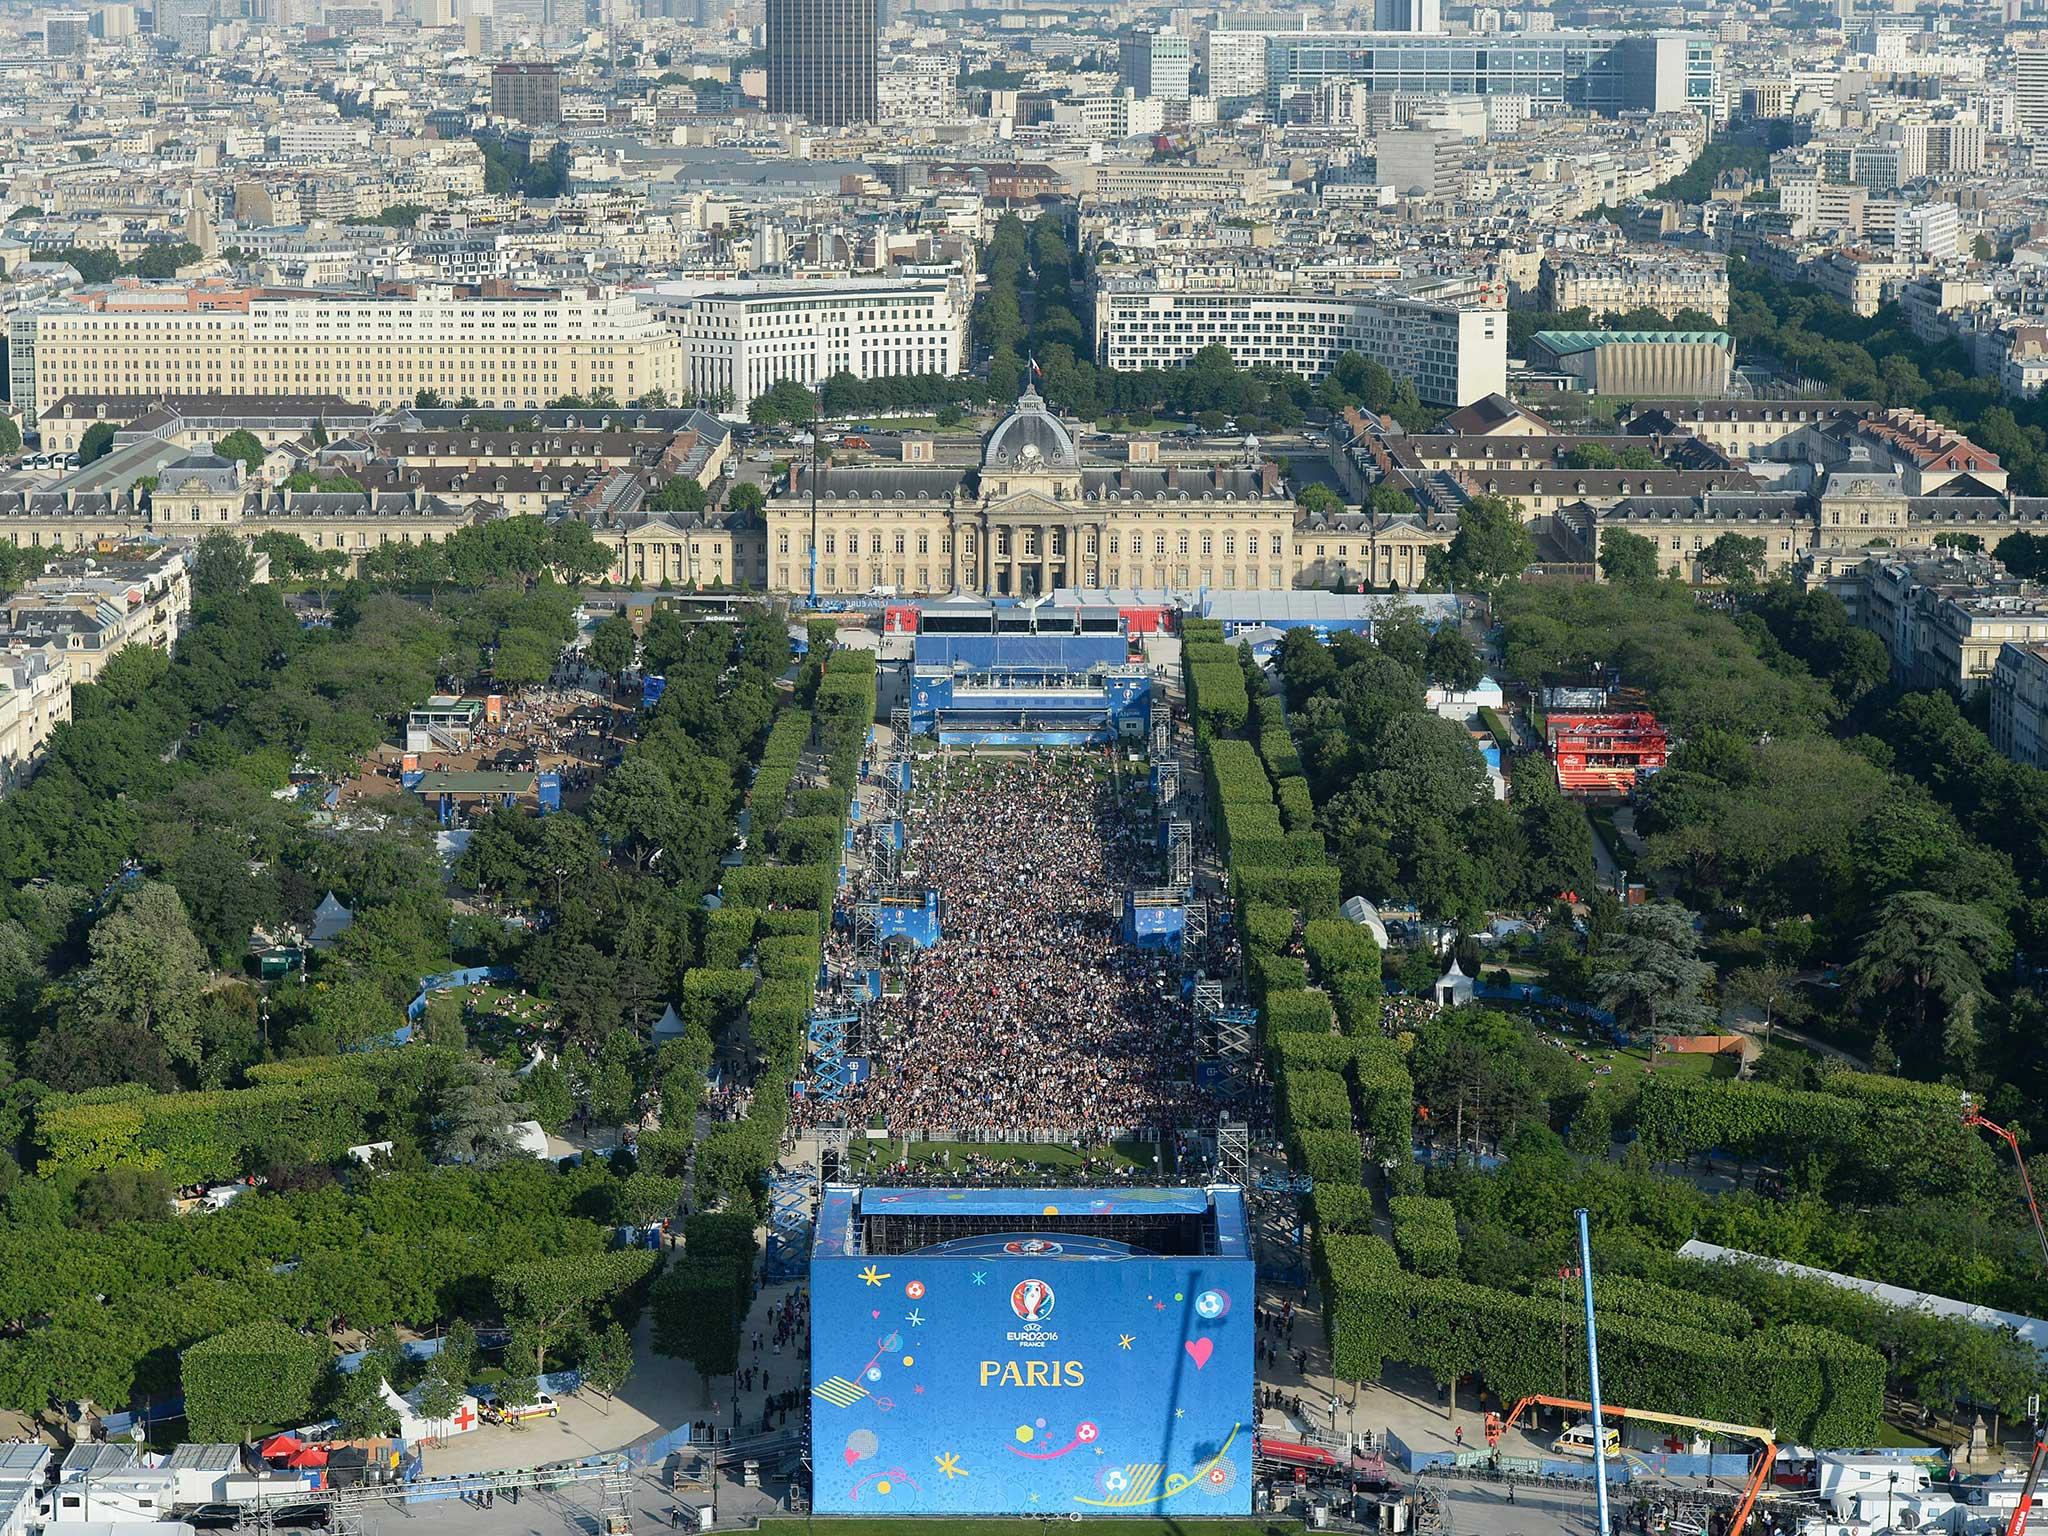 Parisians gather at the fan park in the France capital